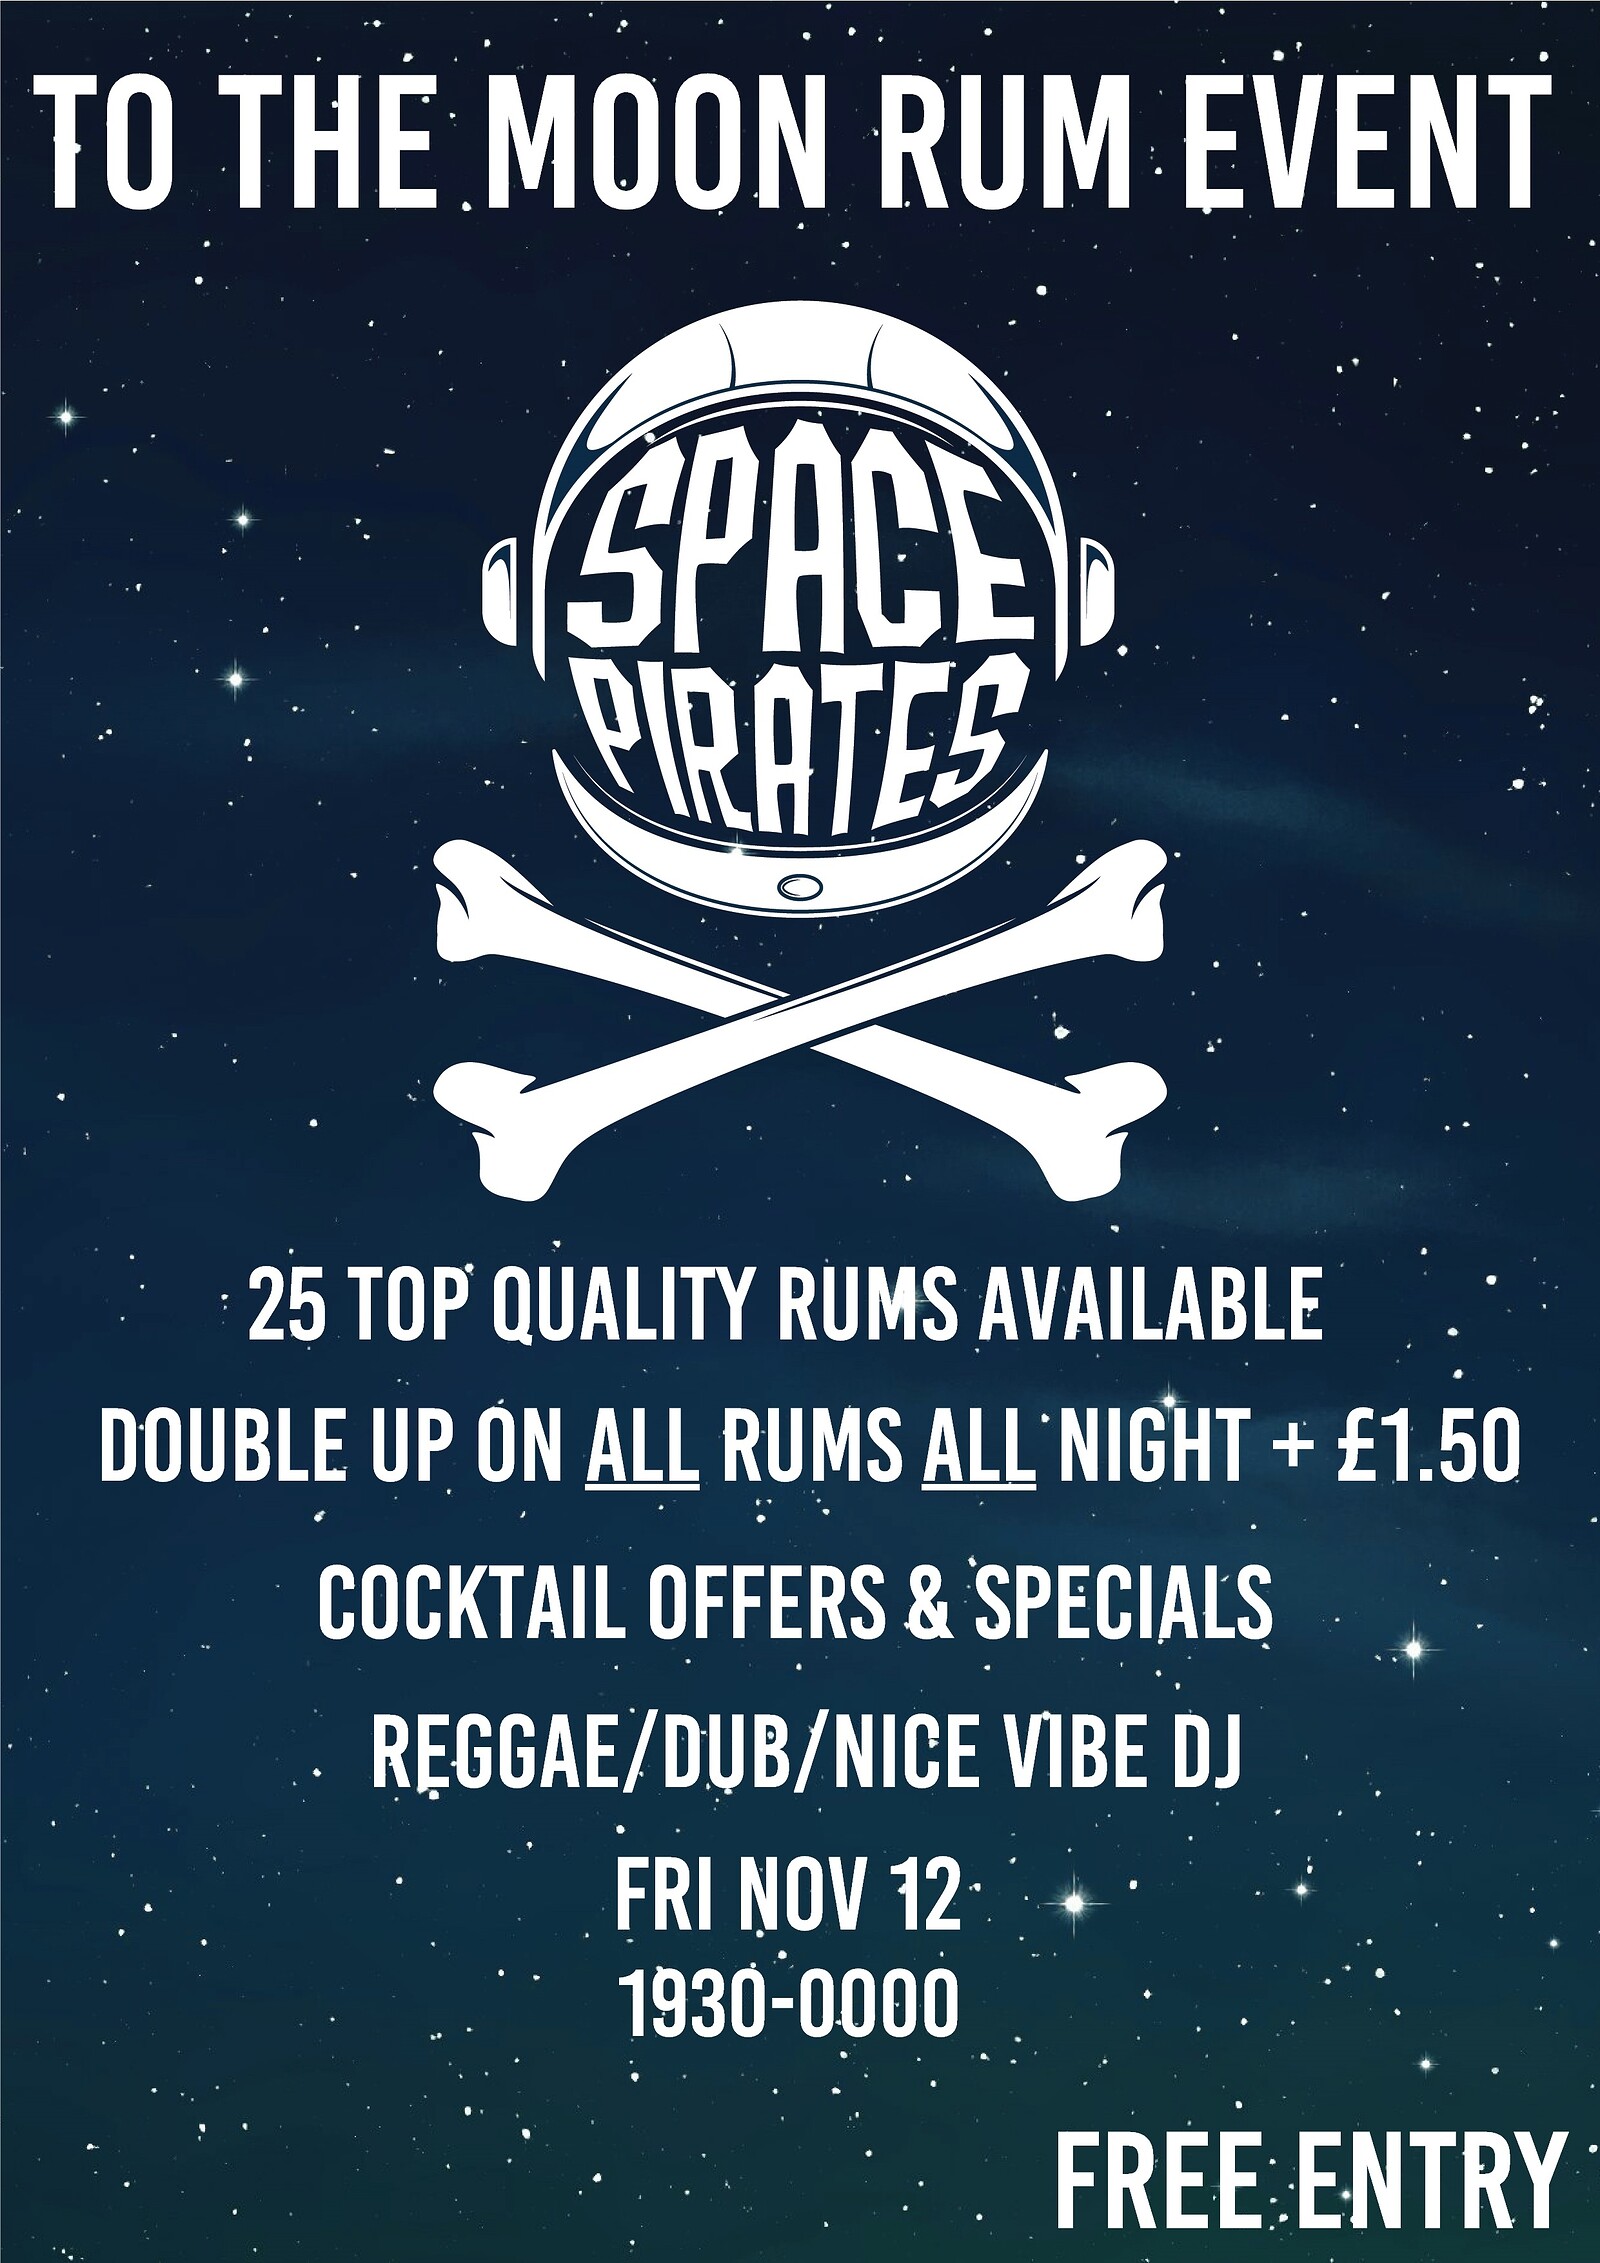 Space Pirates 16 - Rum Event at To The Moon